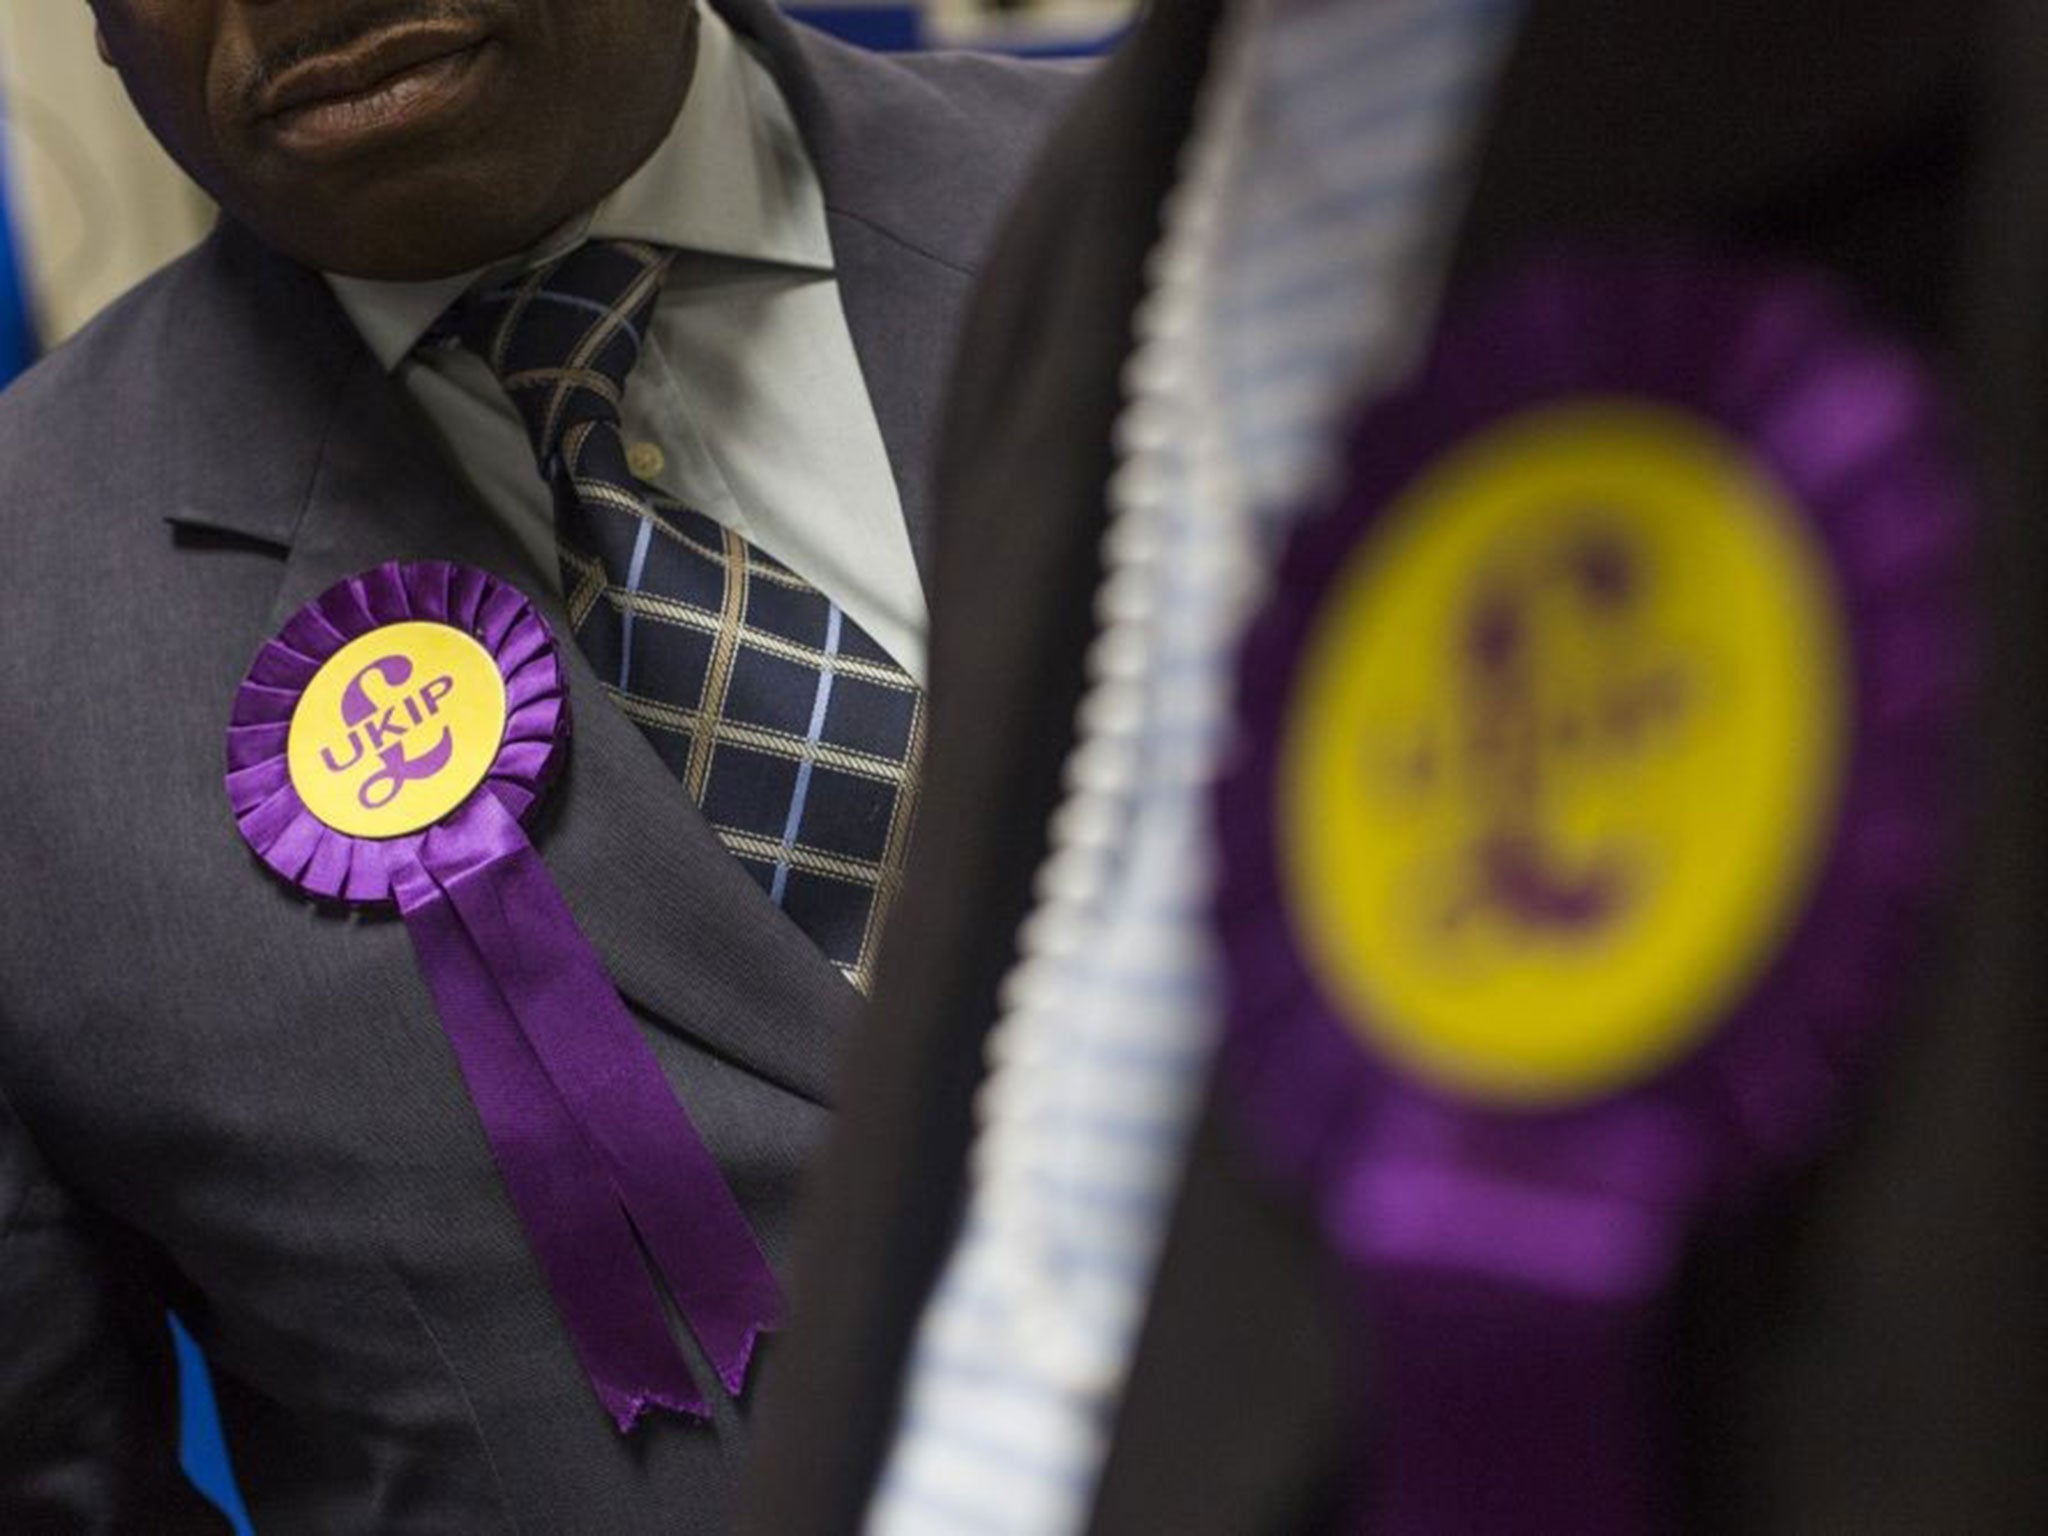 A Ukip councillor has called for Cambridge county council to scrap its translation service